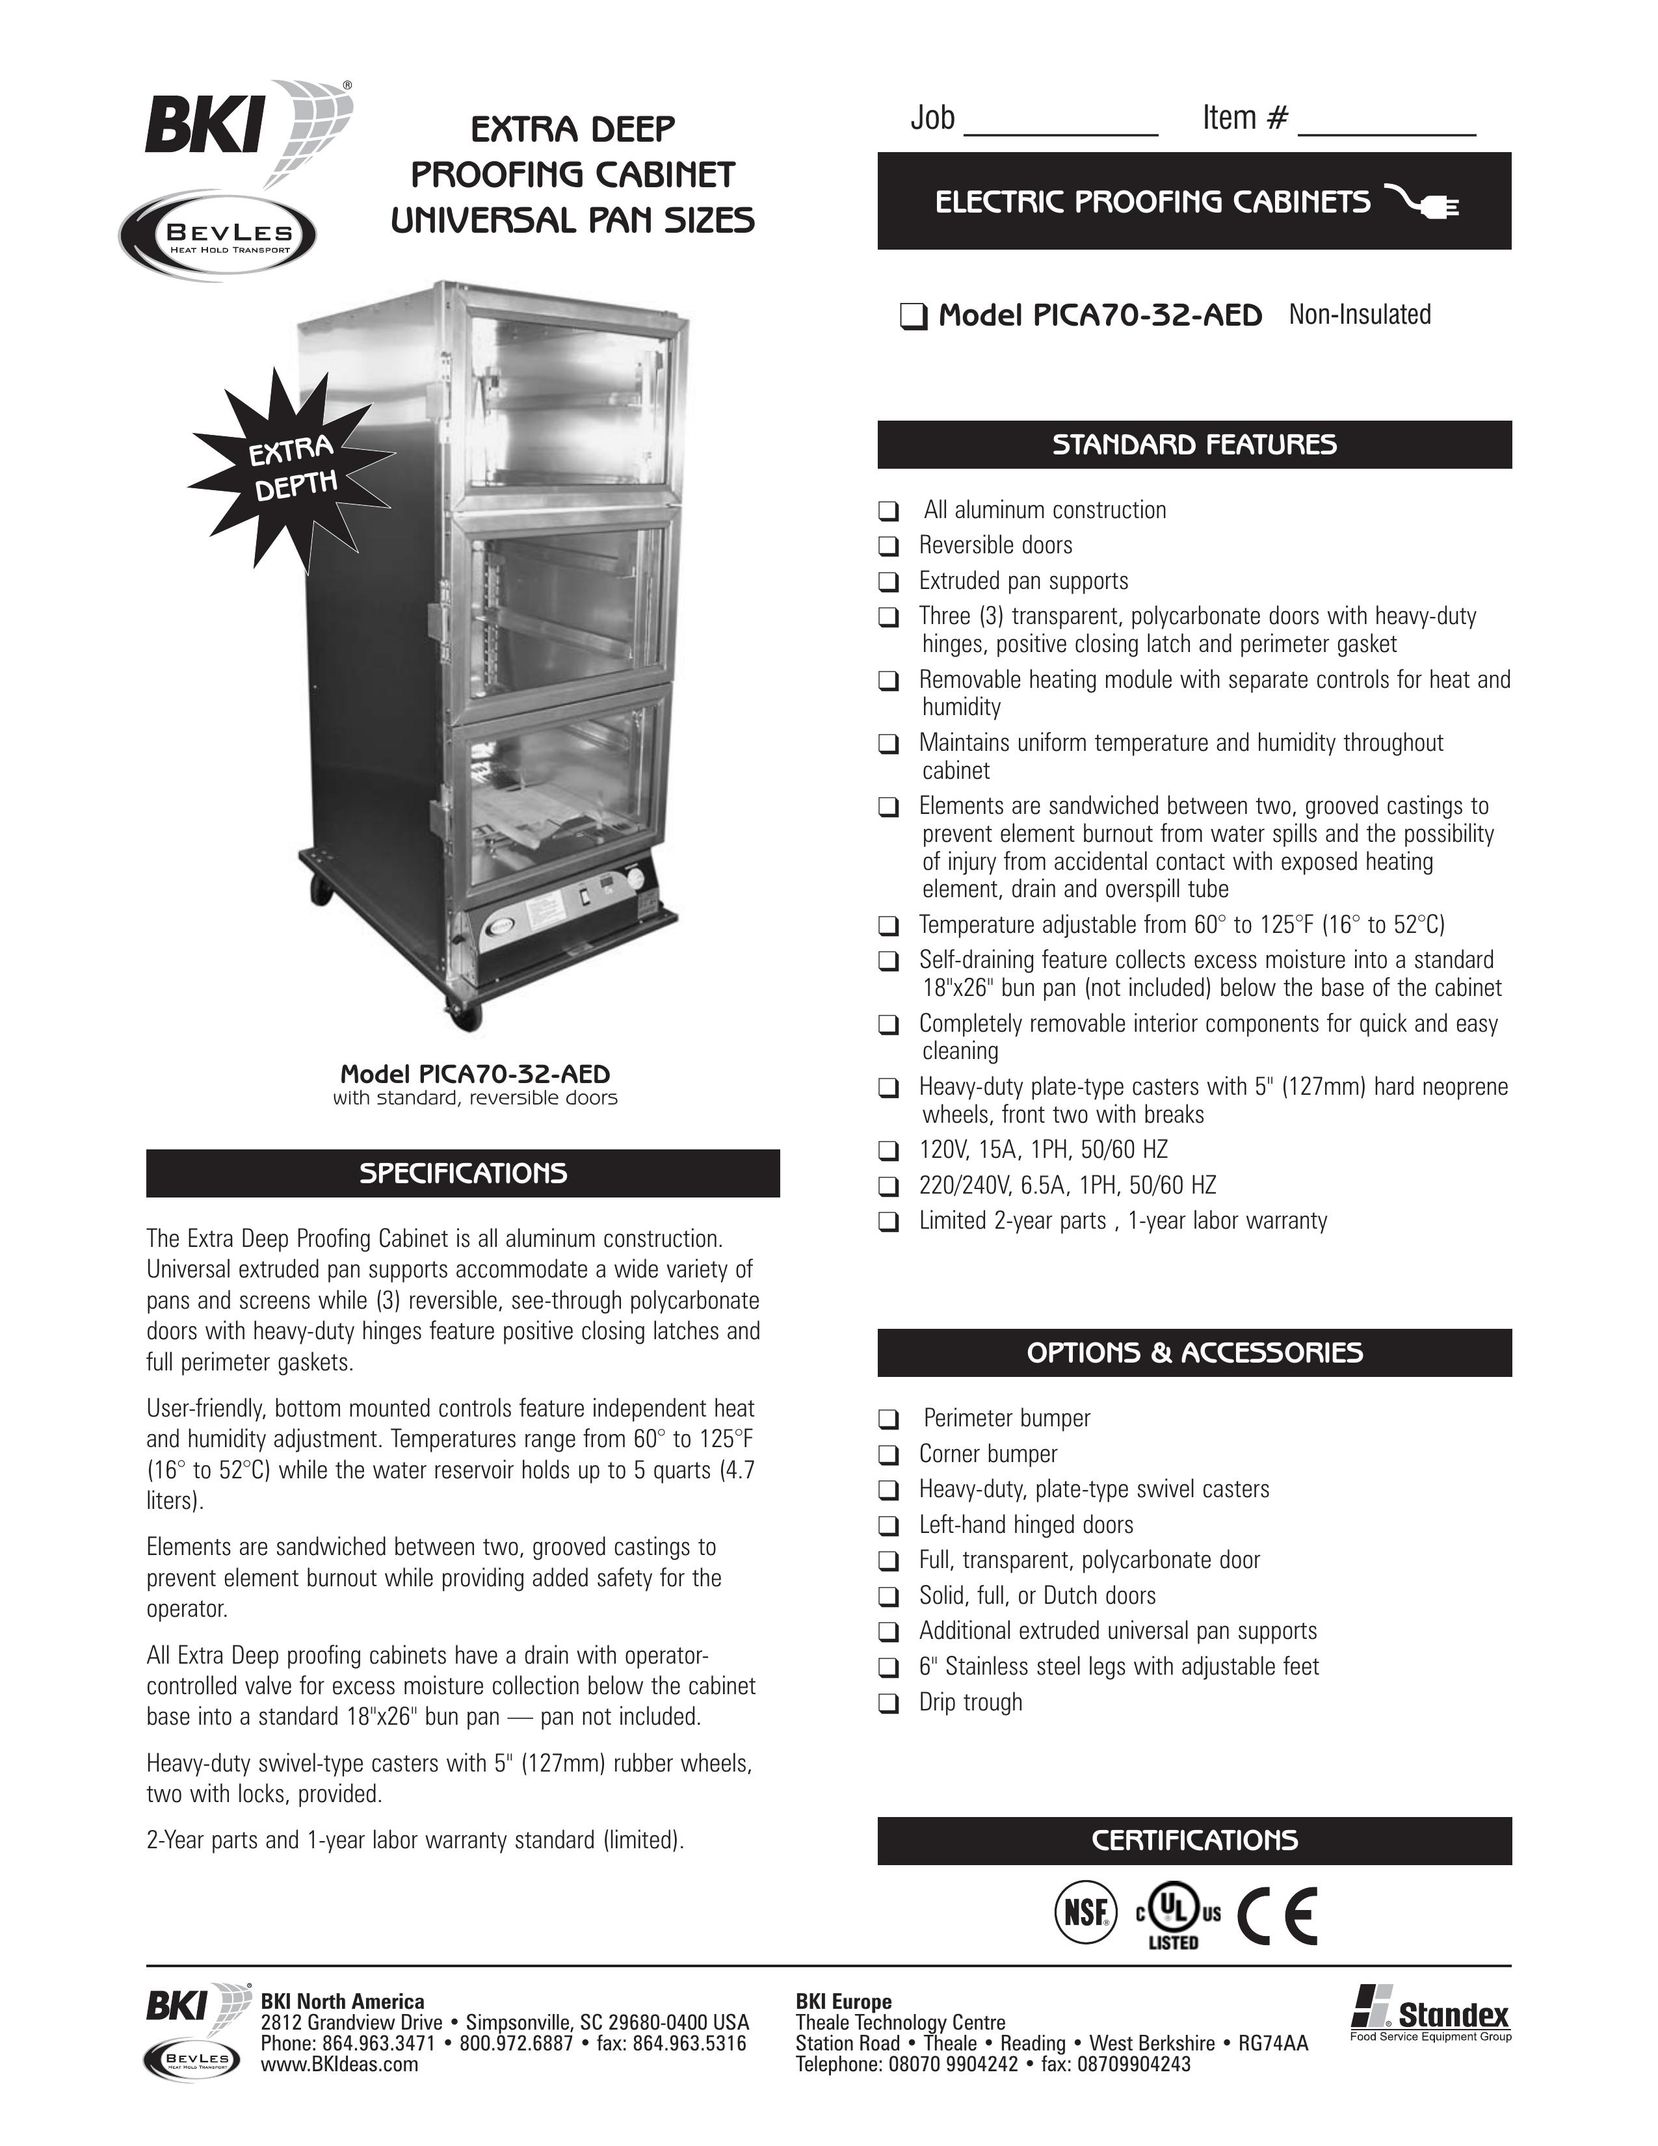 Bakers Pride Oven PICA70-32-AED Microwave Oven User Manual